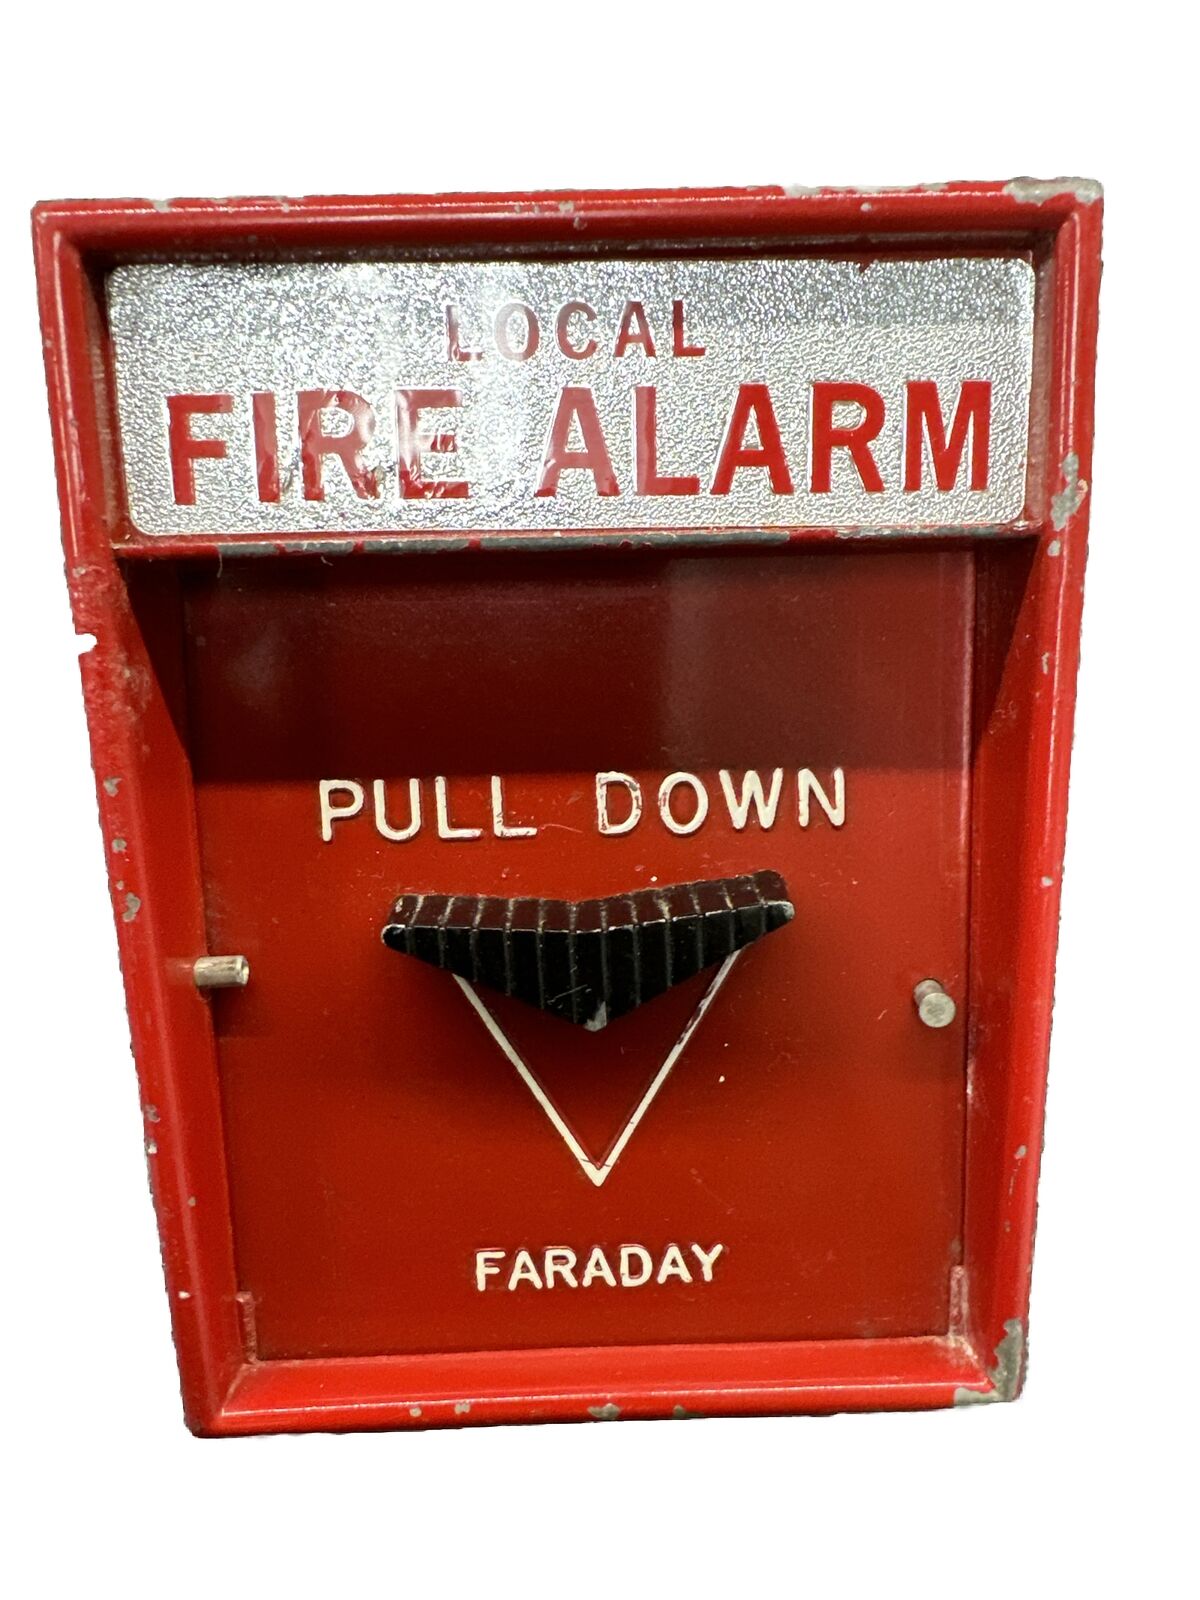 Vintage Faraday 10123-1 Fire Alarm Pull Station Rare Switch Non Coded No Key RED